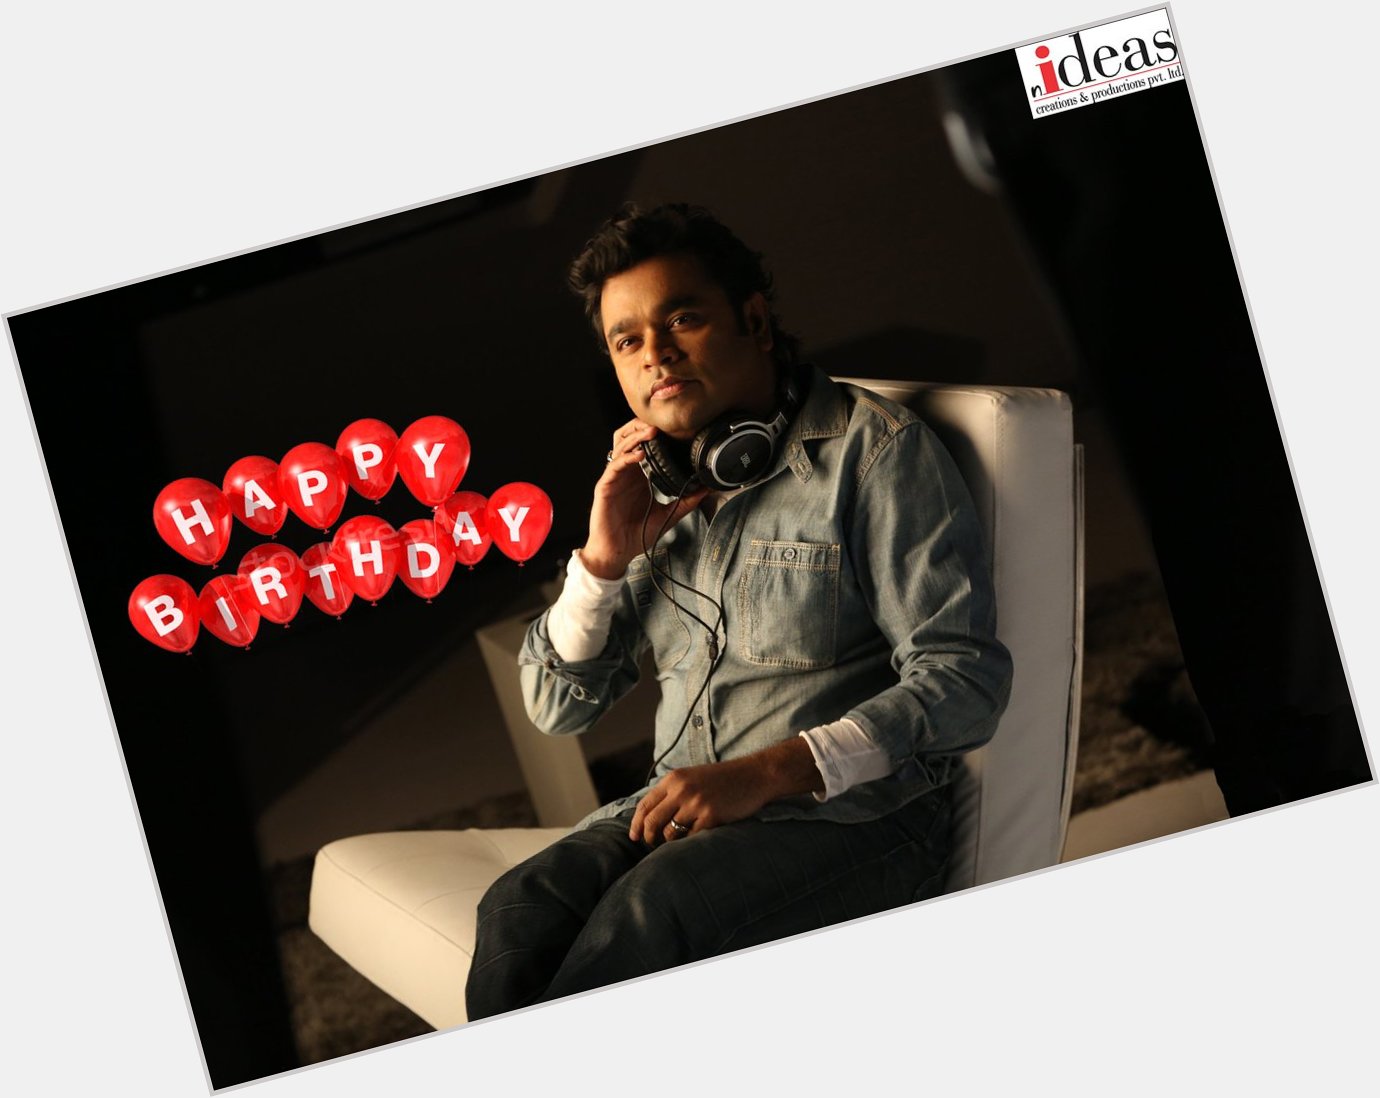 Wishing A.R. Rahman, the person who redefined contemporary Indian music a very Happy Birthday! 